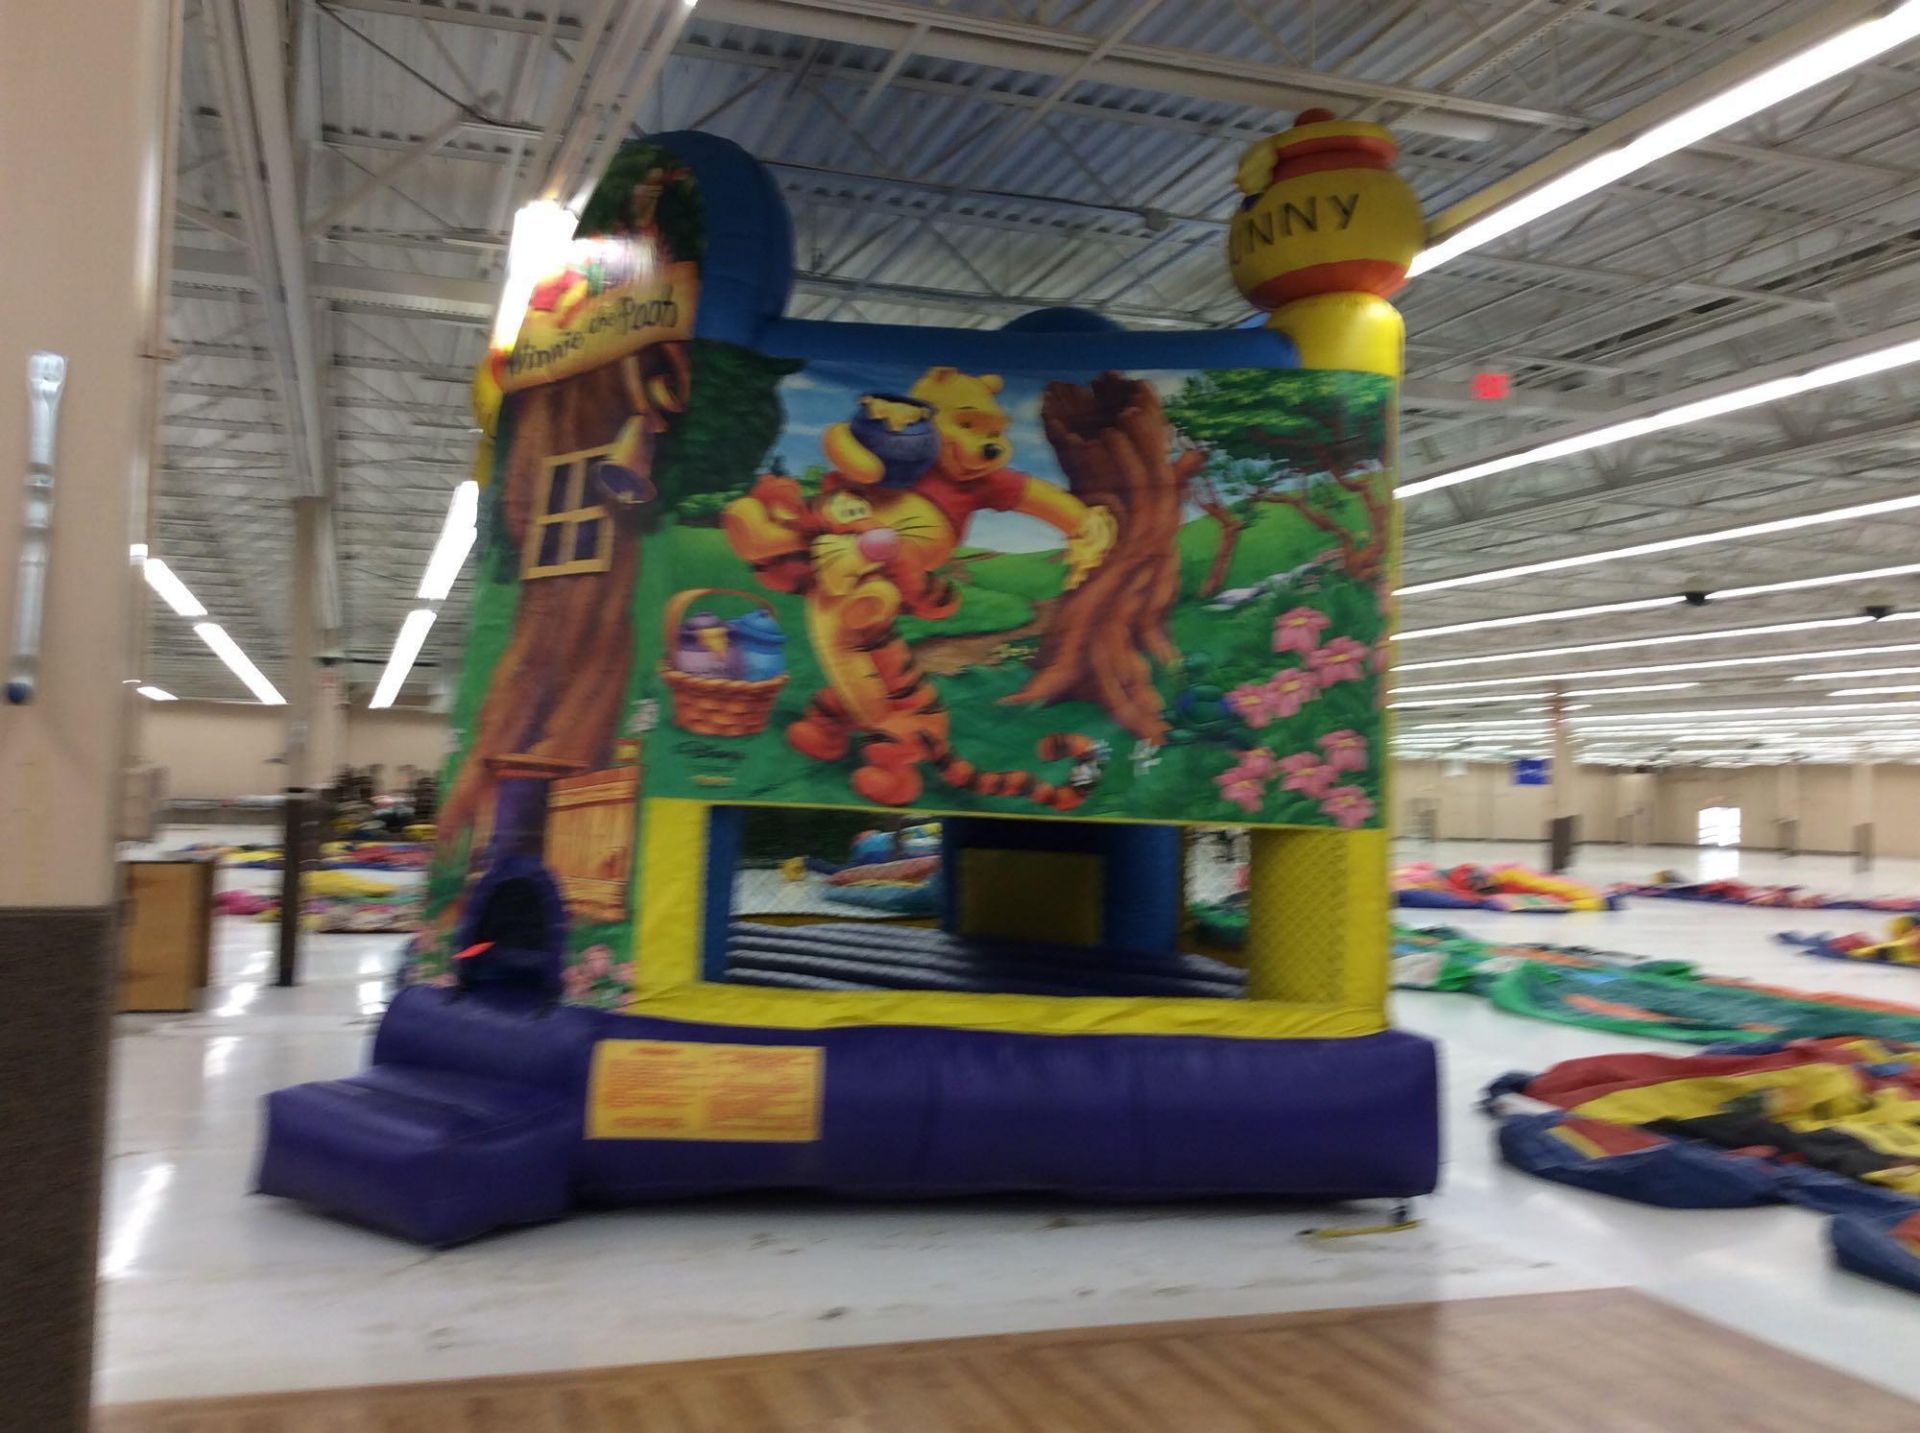 15' x 15' inflatable "Winnie the Pooh" bounce house, with blower. - Image 2 of 3